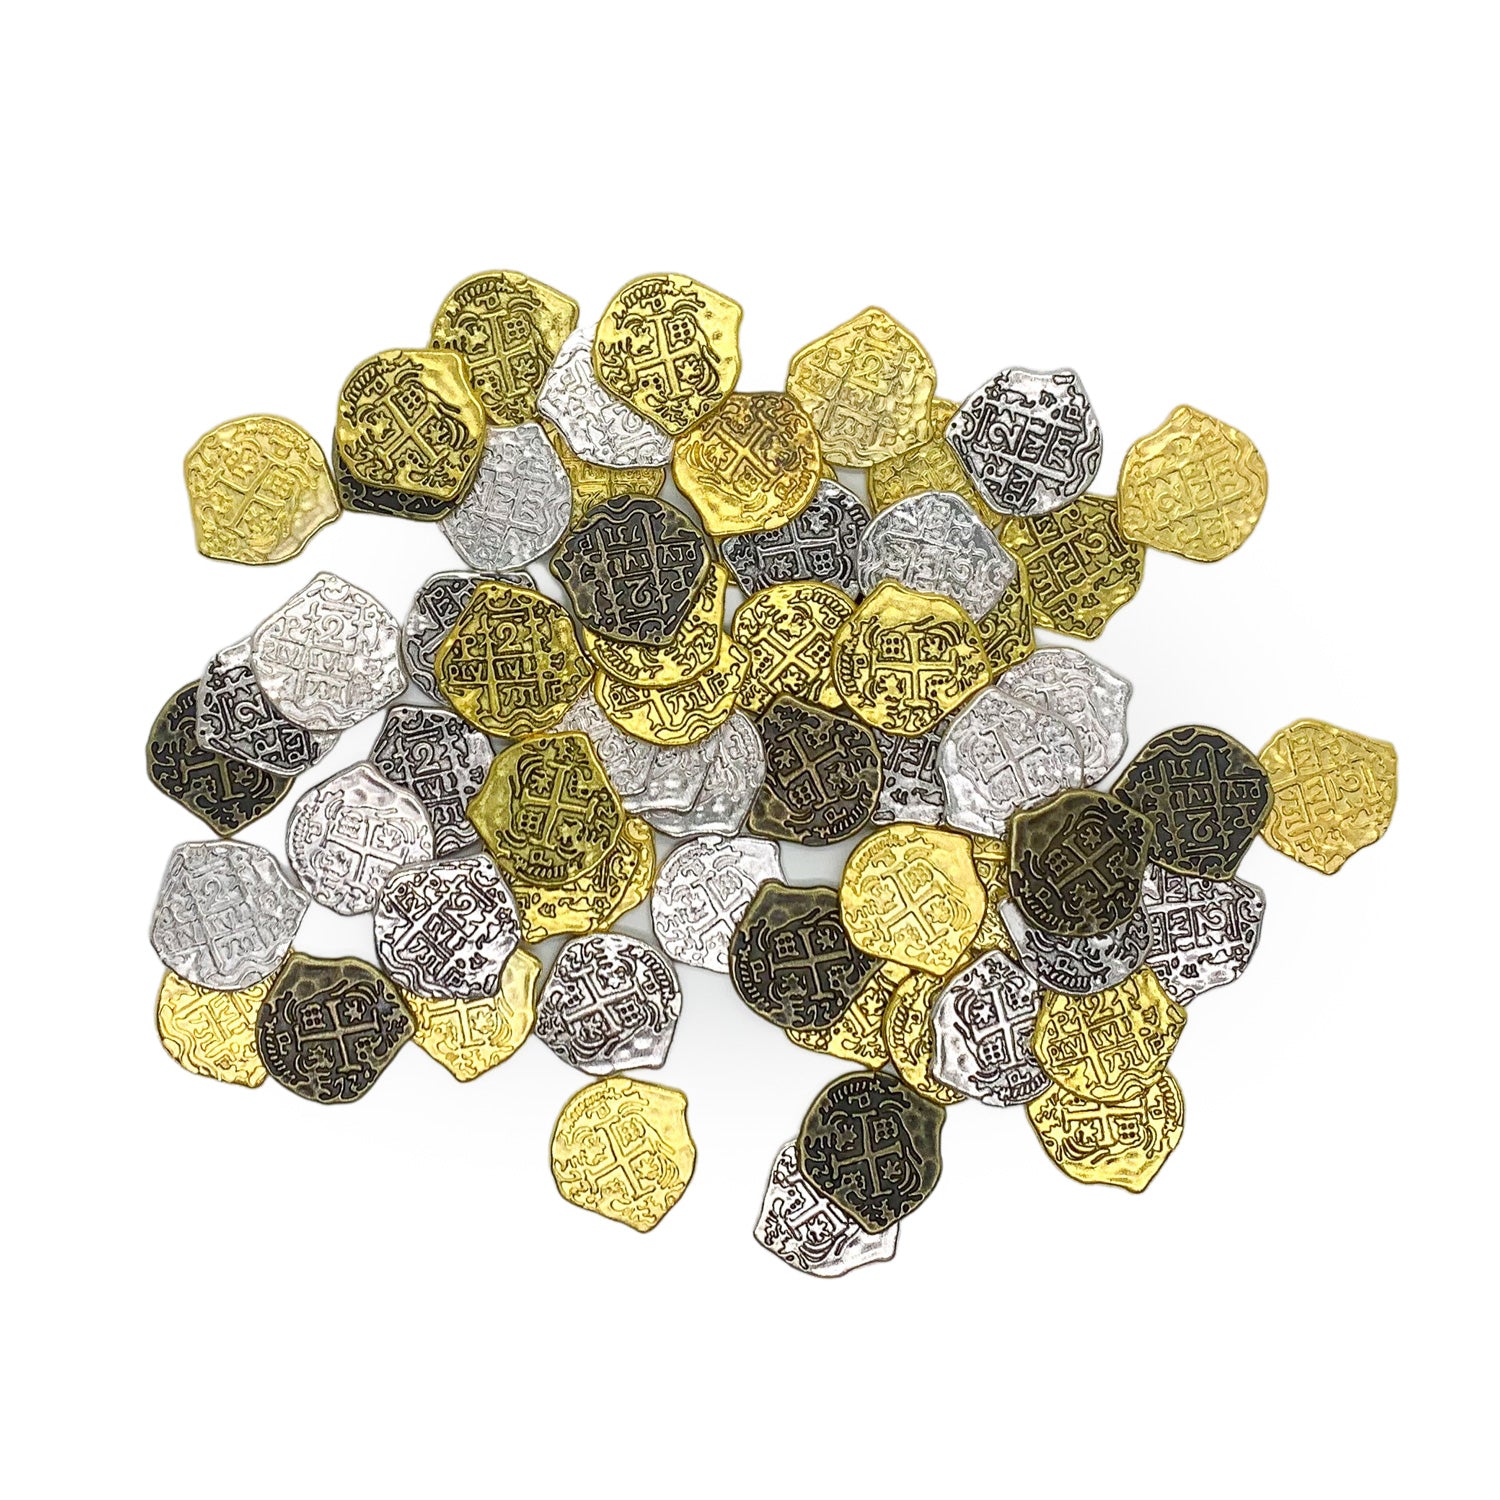 Mixed Metal Gold and Silver Pirate Doubloons